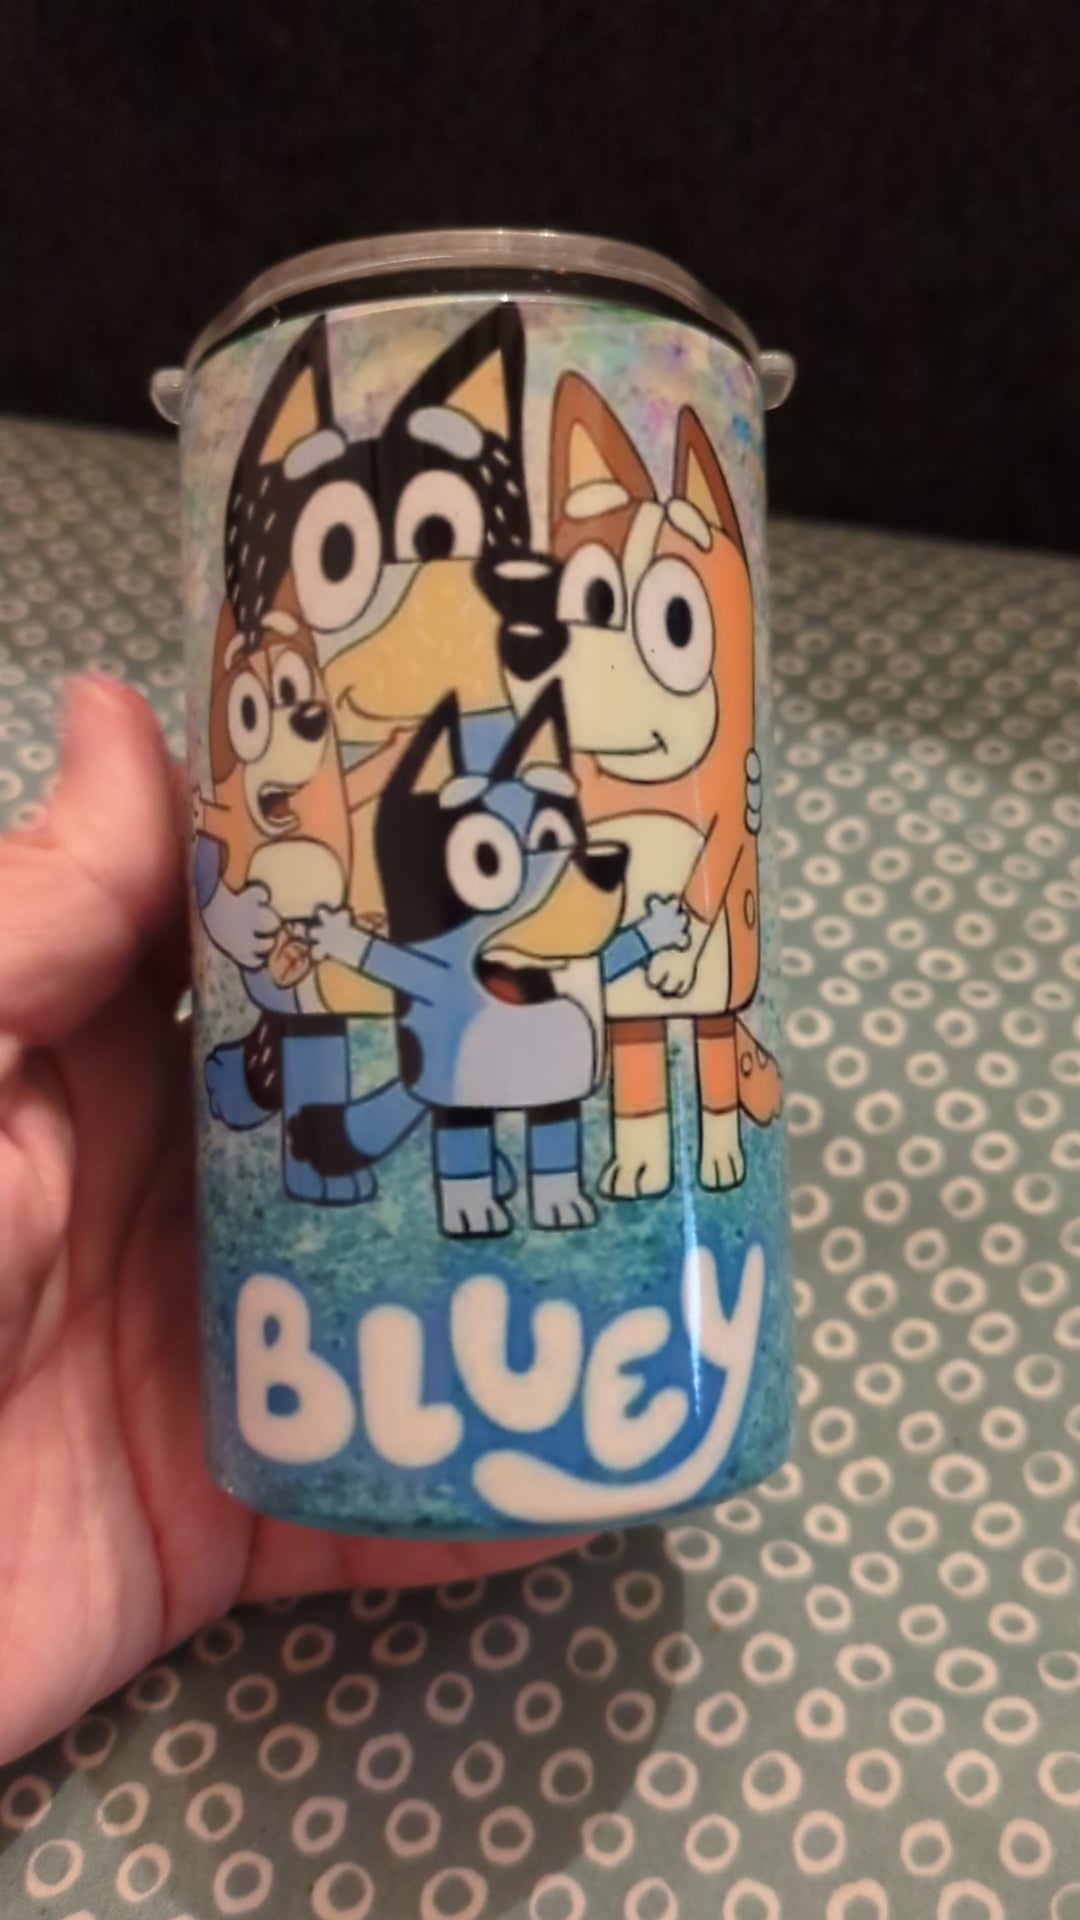 Color changing kids cup 💙 #Bluey #Disney #Hearts #KidsCup #ColdCup #C